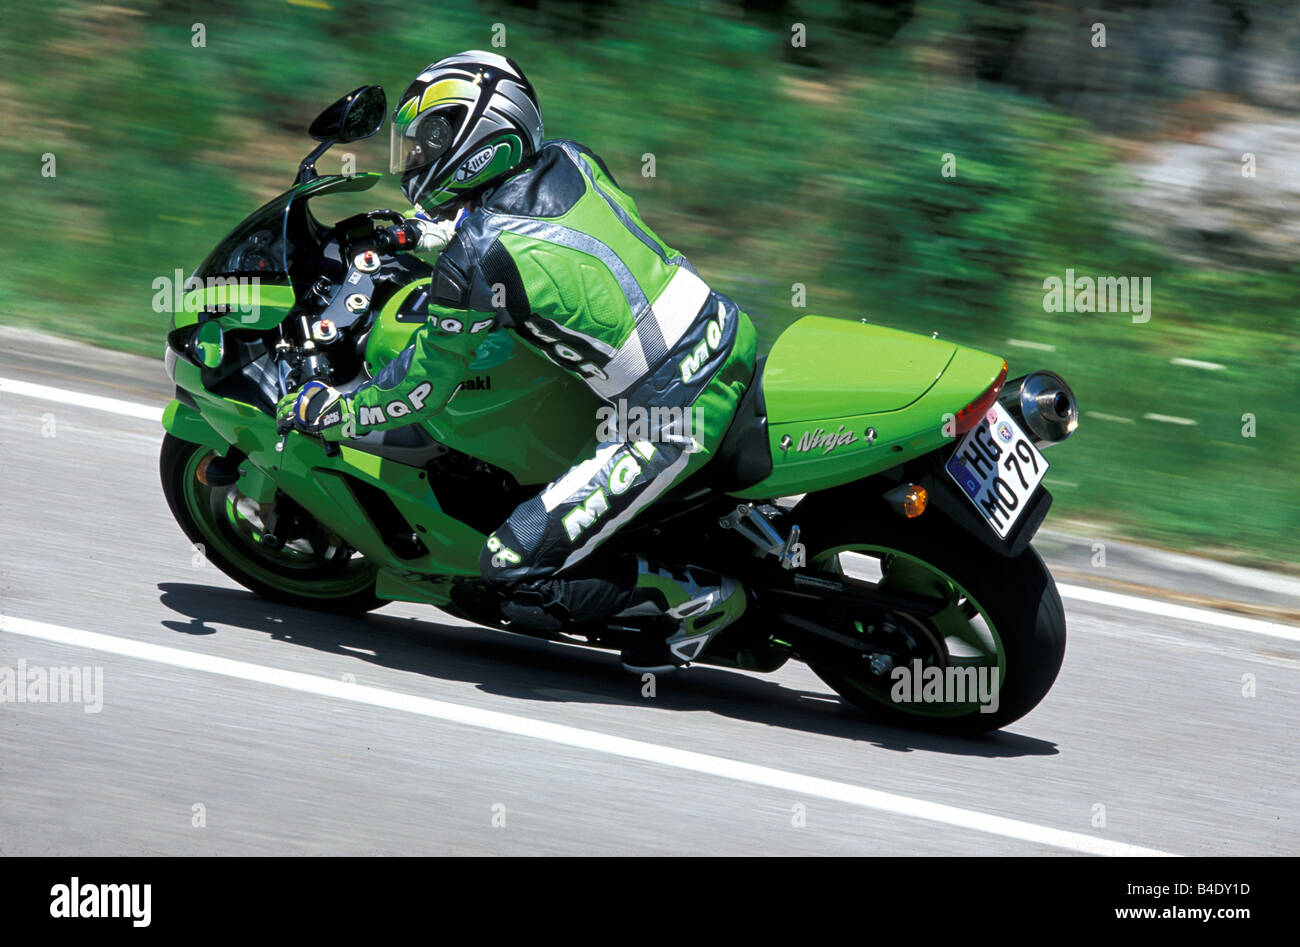 Kawasaki Zx 12r High Resolution Stock Photography and Images - Alamy